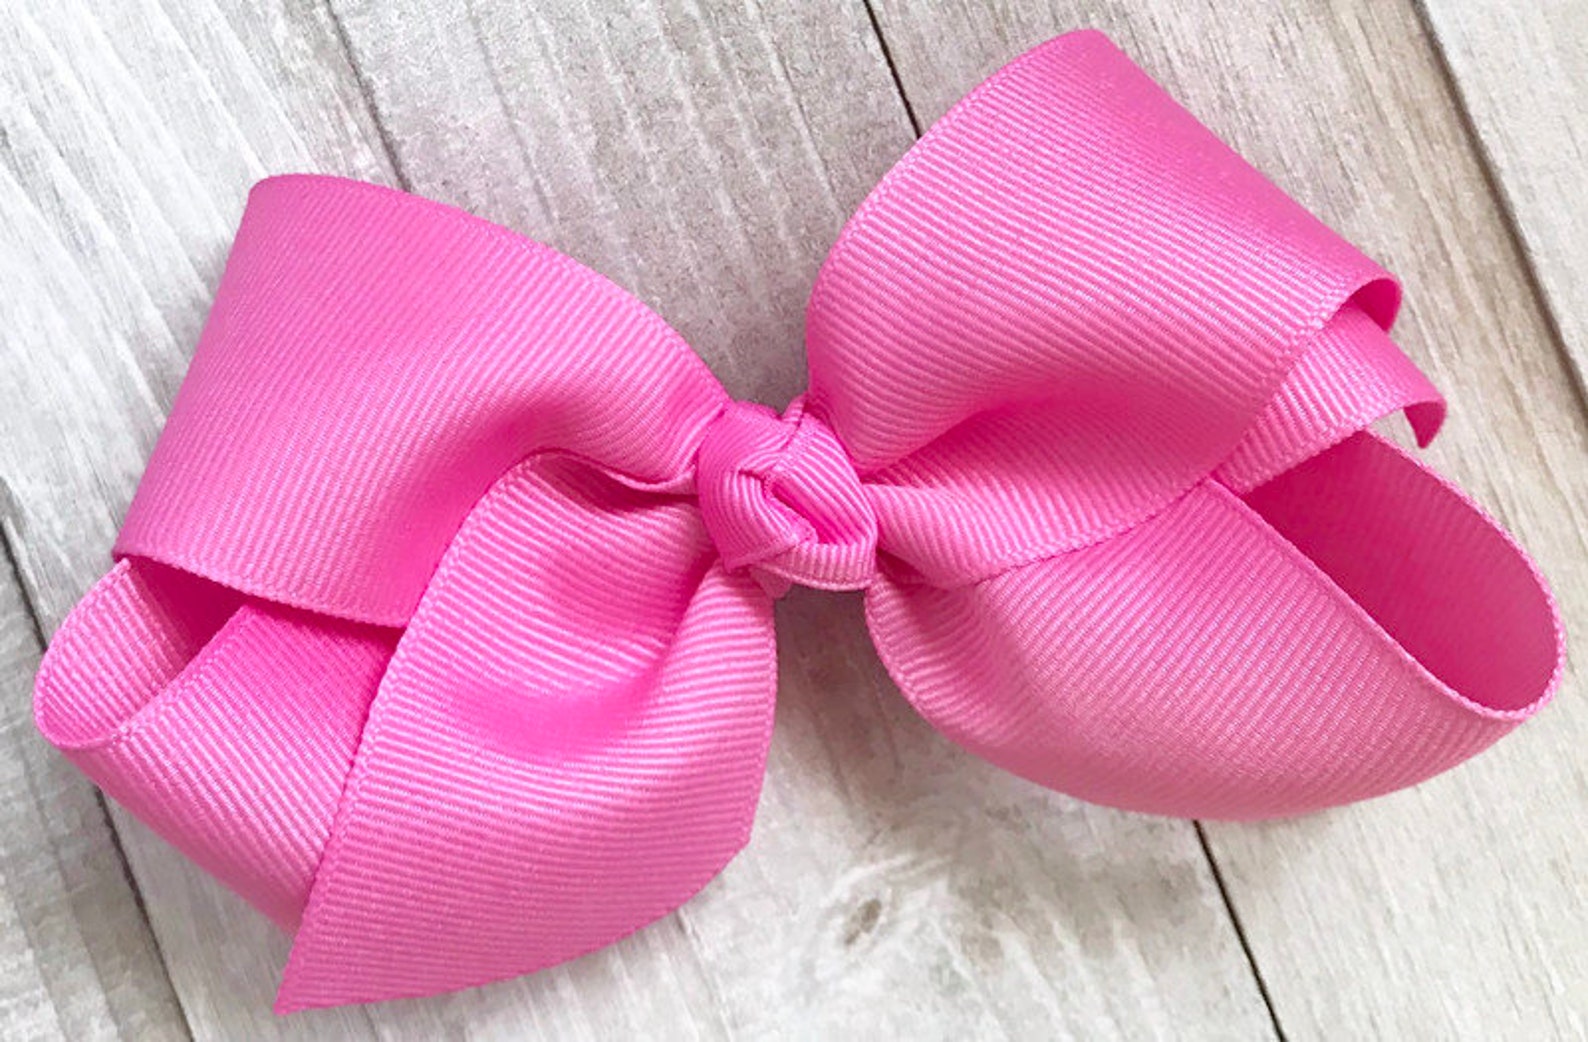 Blue and Pink Hair Bow Clips - wide 7